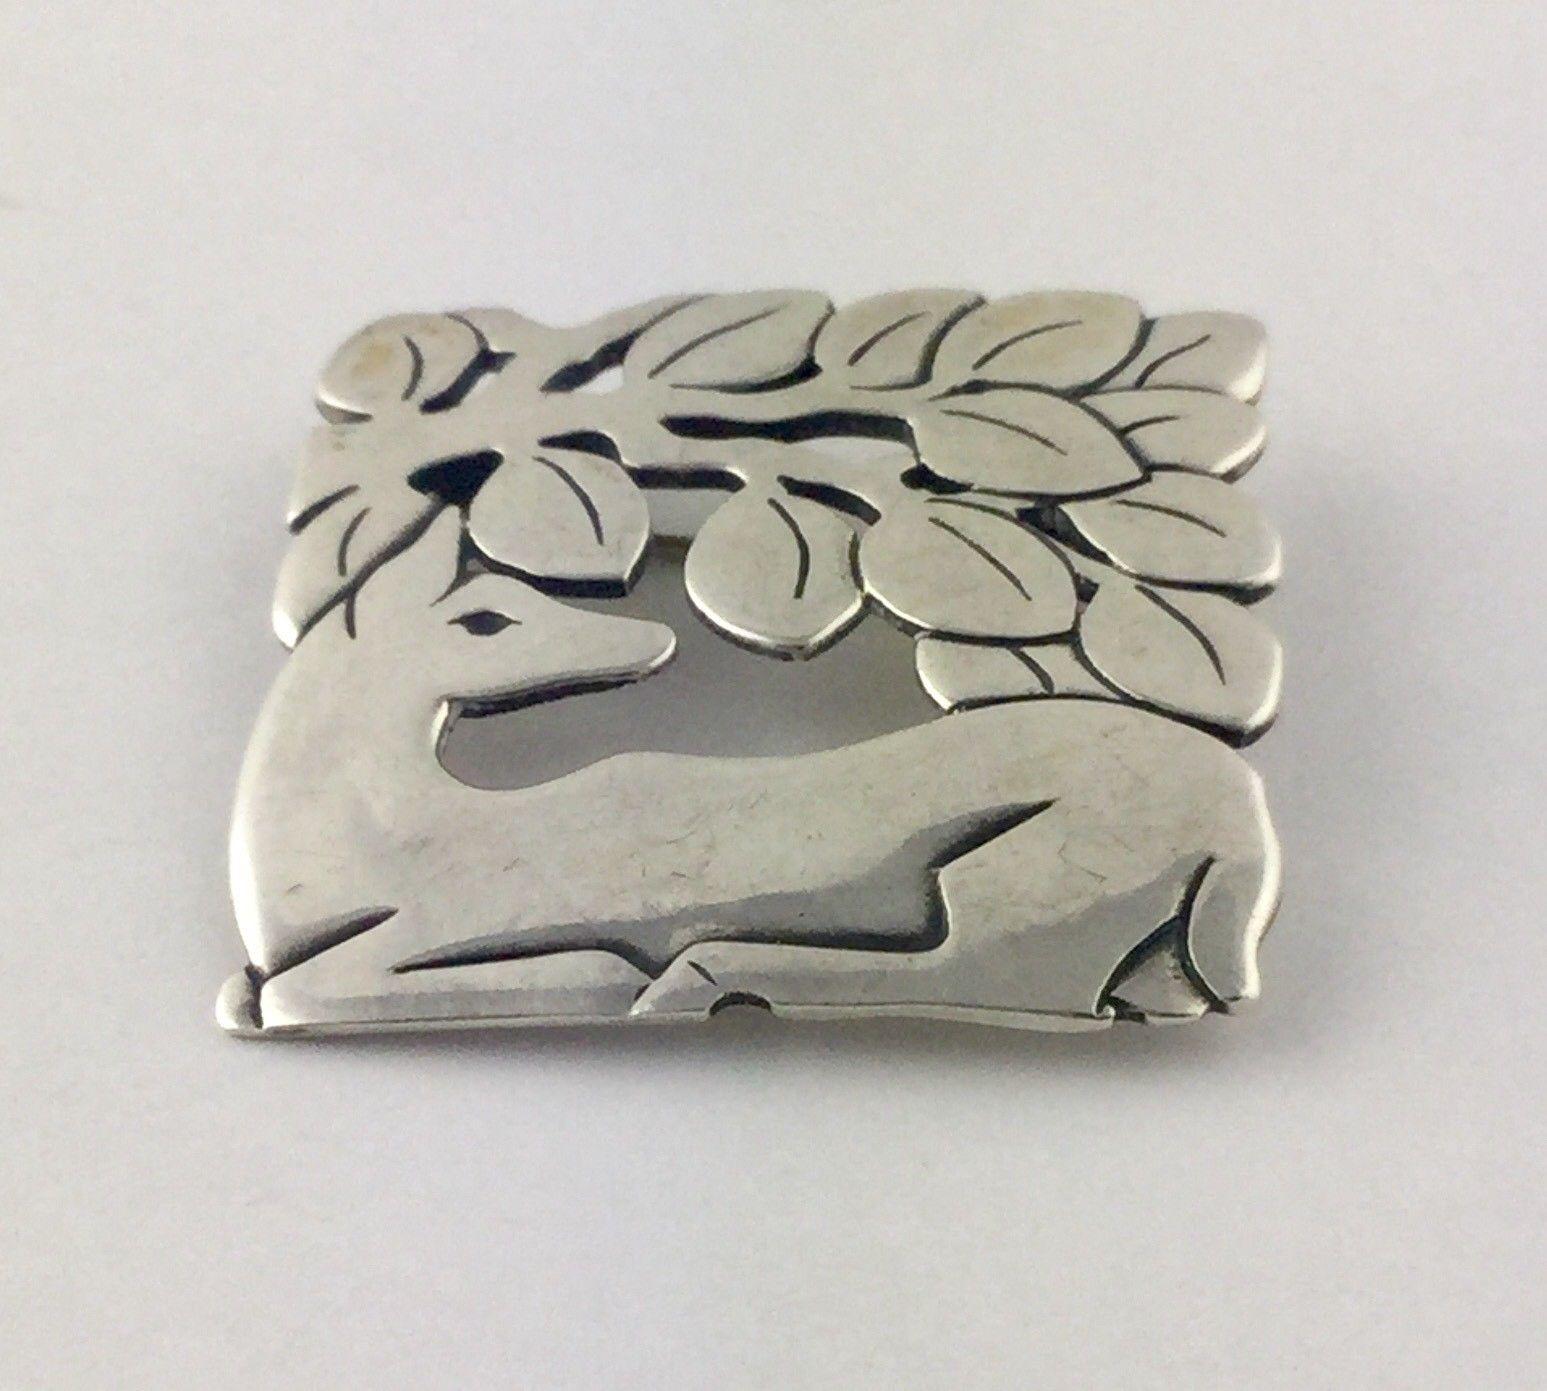 James Avery New Deer under a tree pin brooch.

Marked: JA with candelabra STER

Measures: 1 1/8